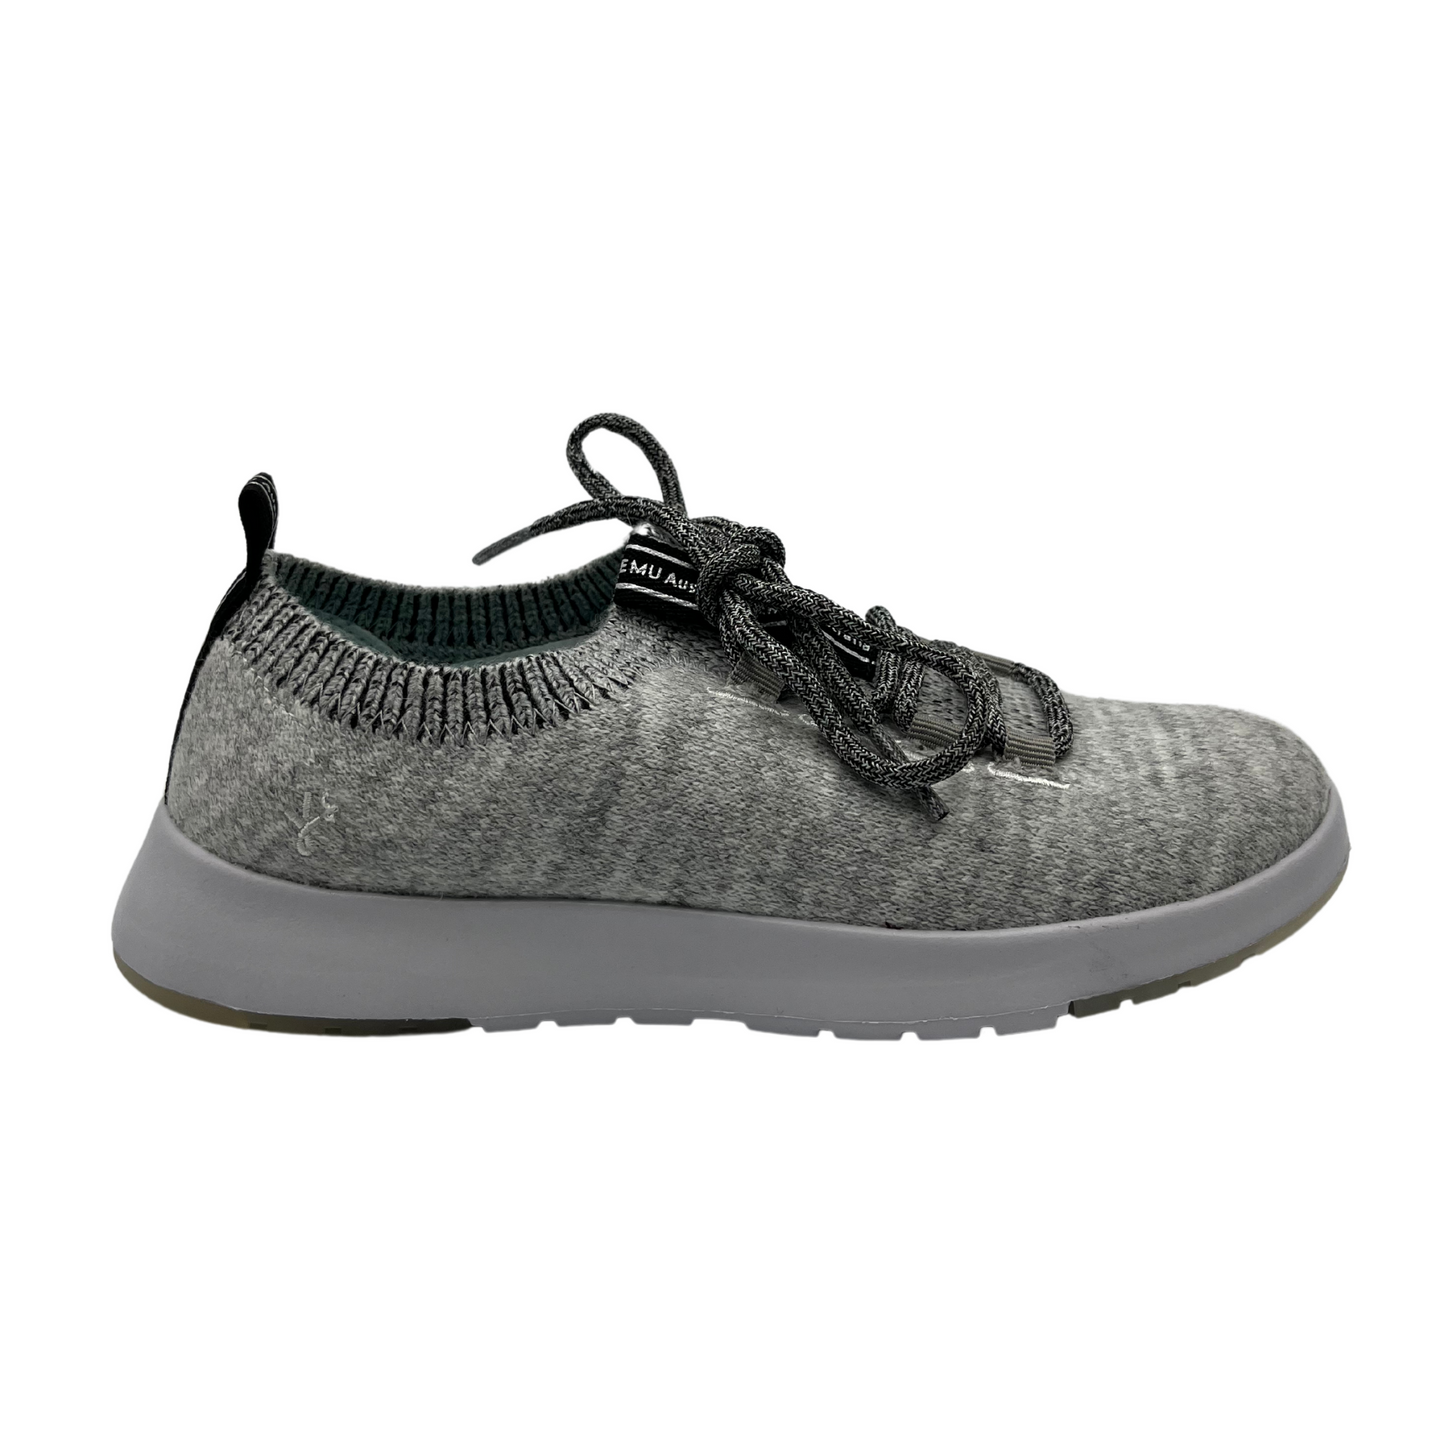 Right facing view of grey wool blend sneaker with heather grey laces and white EVA outsole